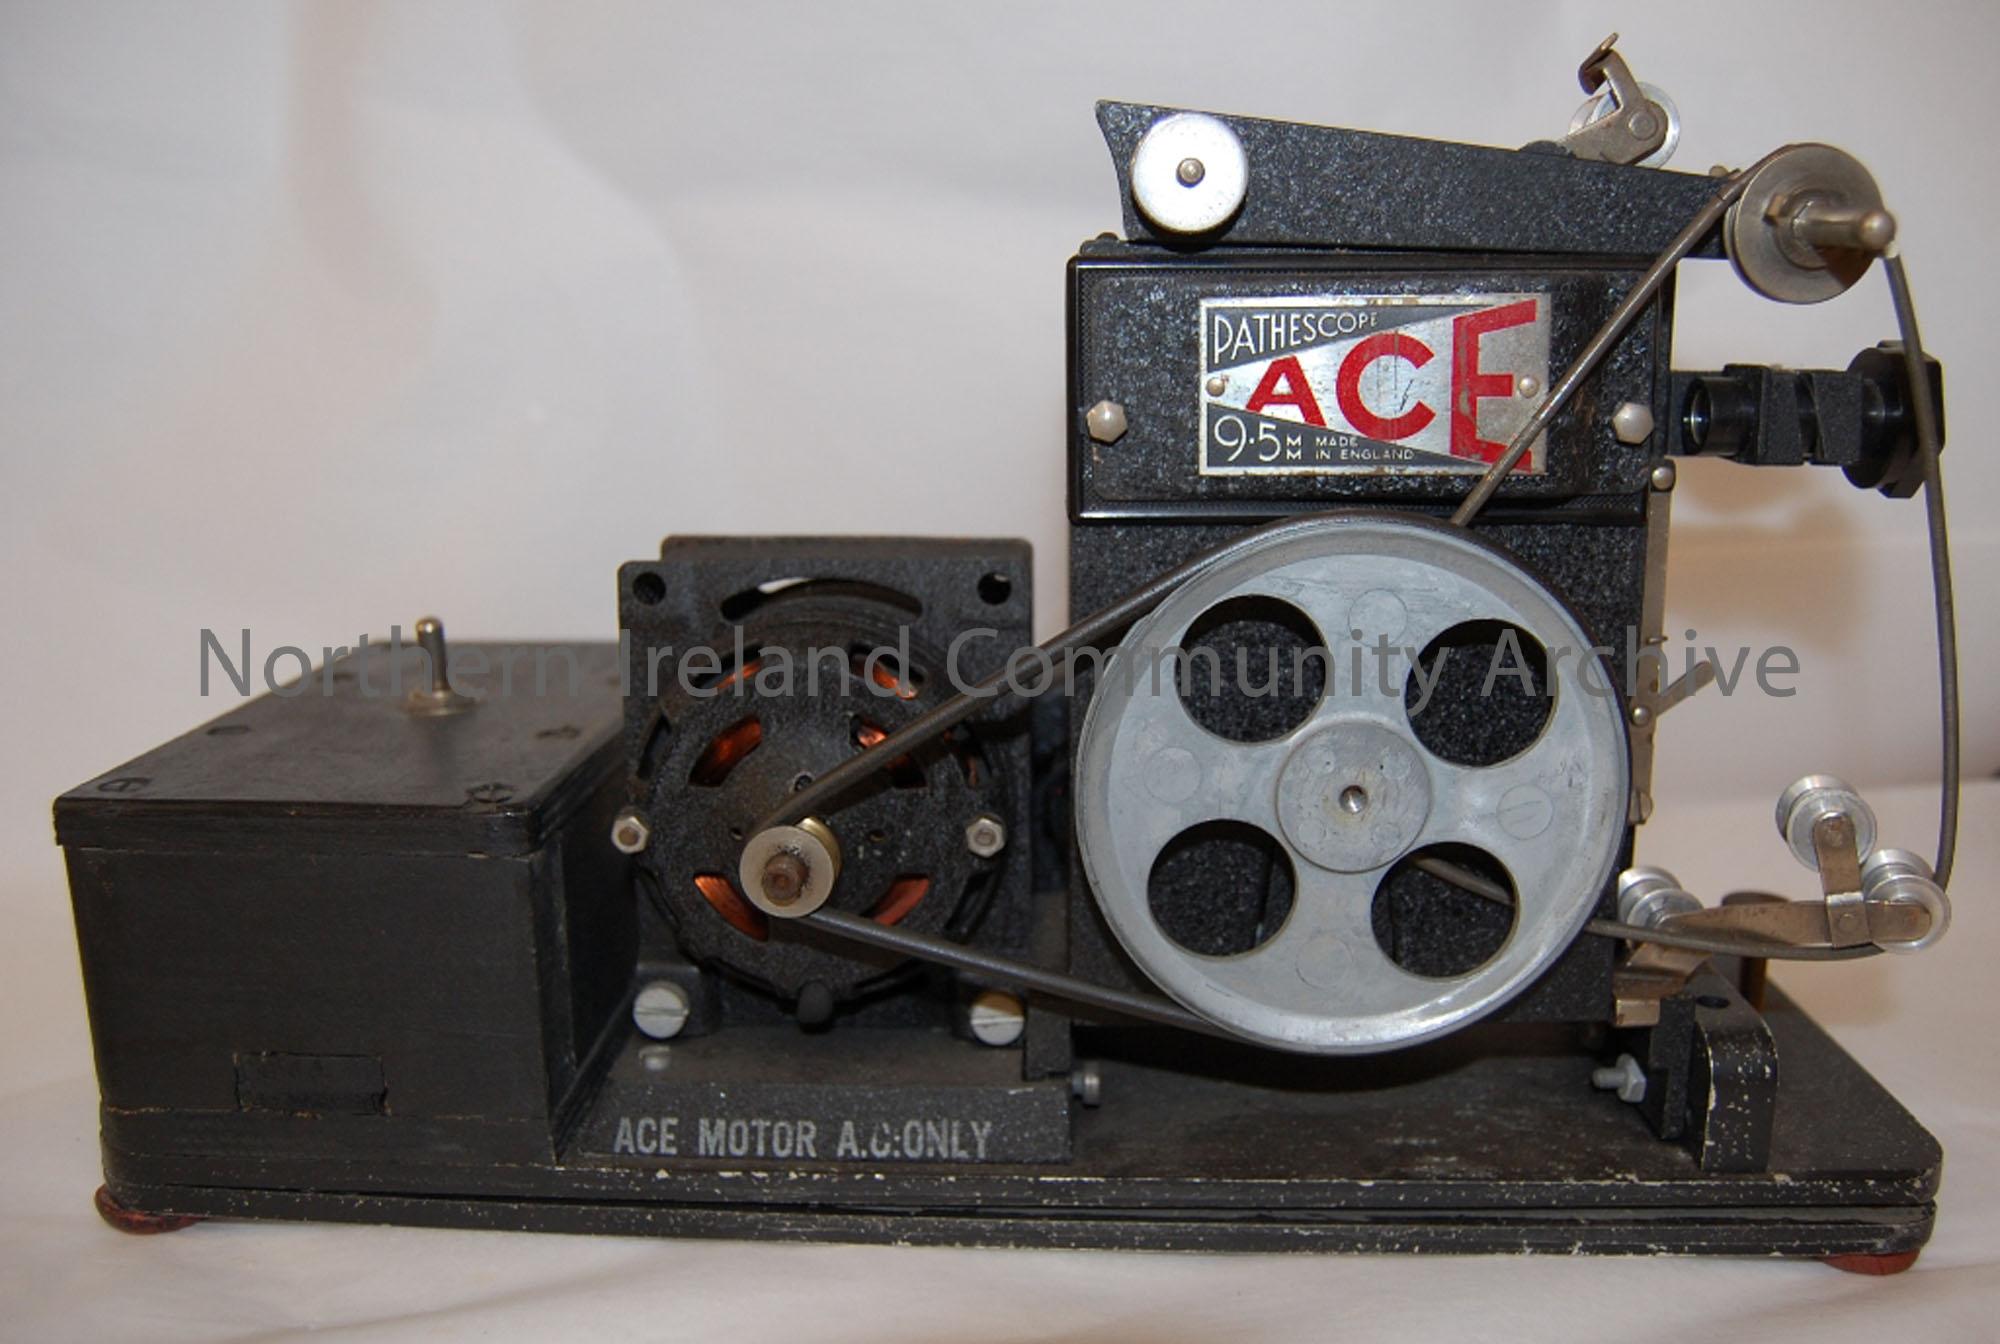 Pathescope 9.5mm silent film projector with added motor drive. Manufactured early 50’s.